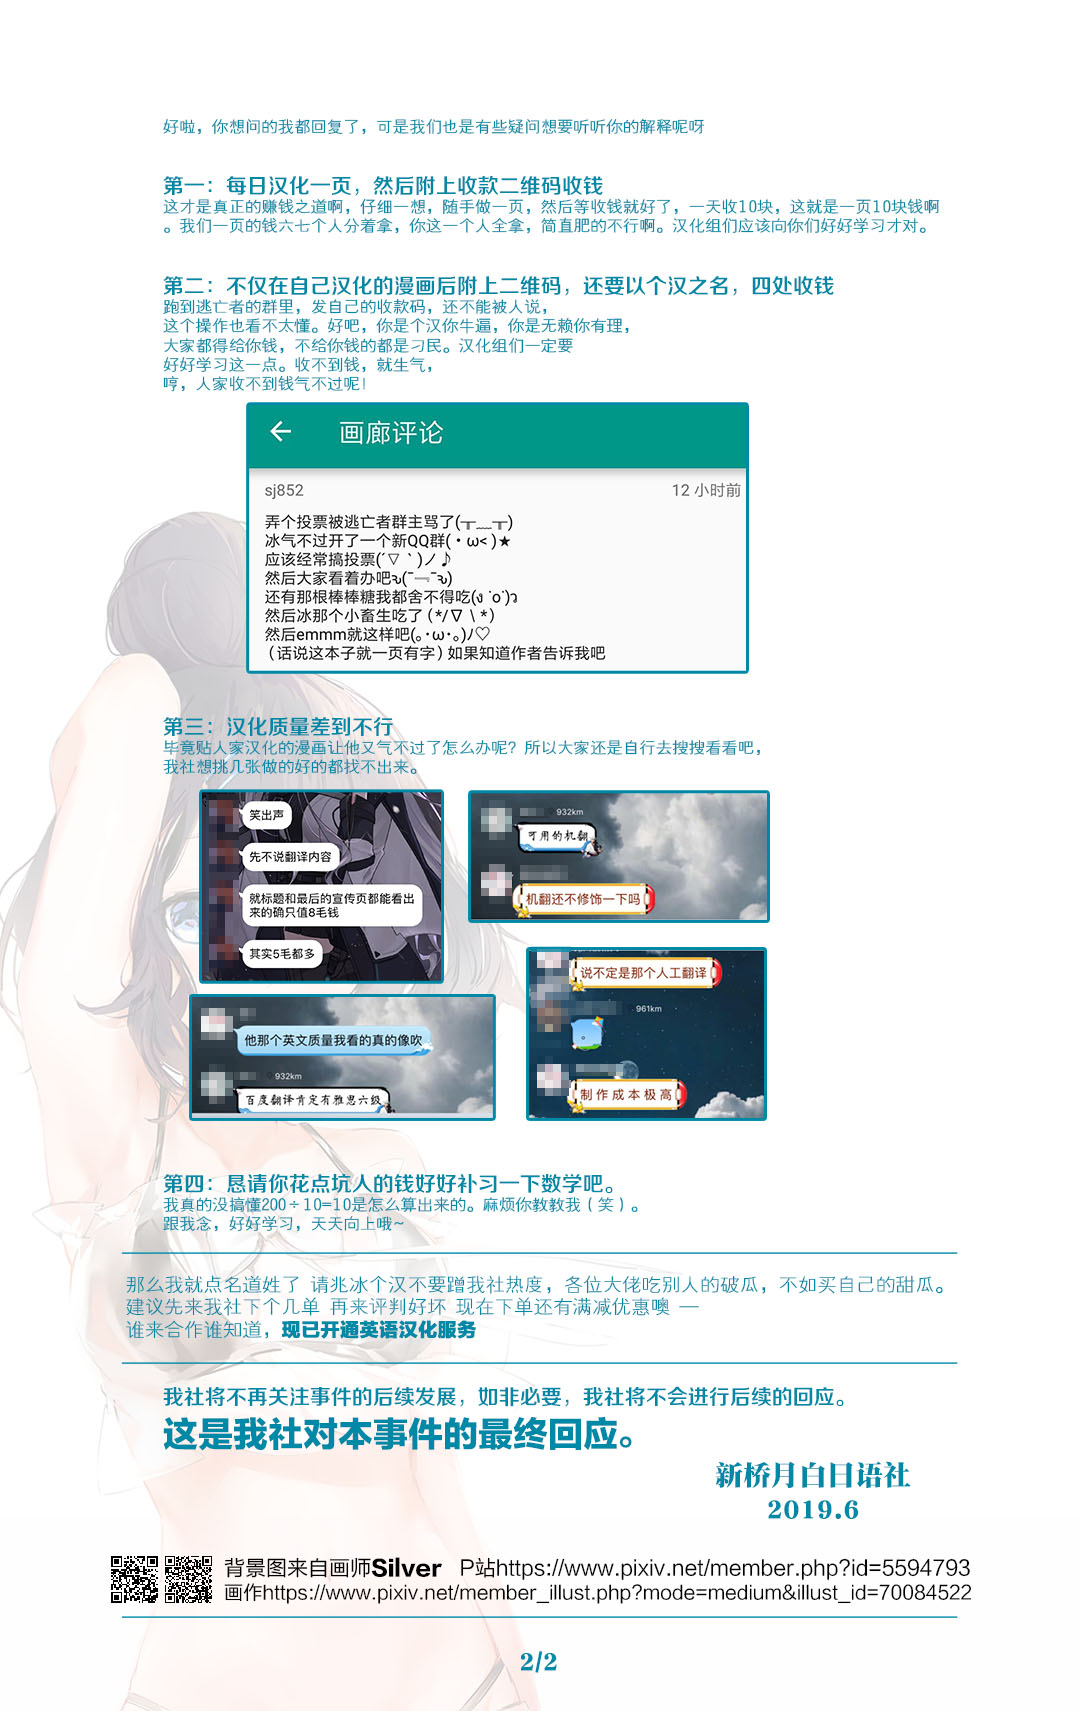 [Remora Works] LESFES CO -DELIVERIES- [Chinese] [WARREN RIANE×新桥月白日语社] page 31 full